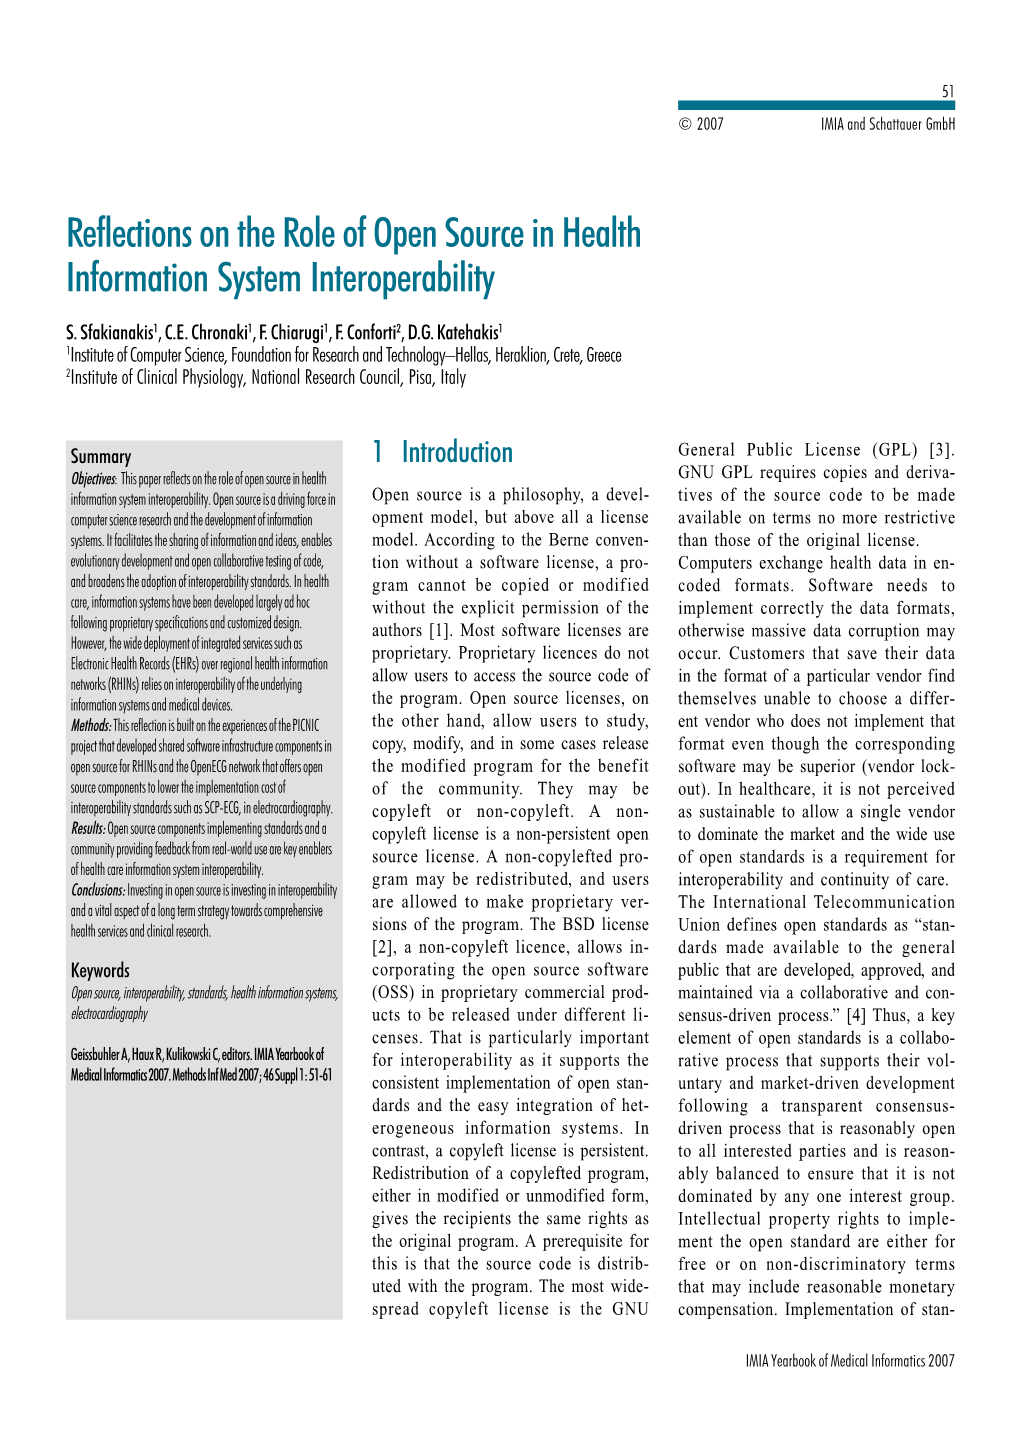 Reflections on the Role of Open Source in Health Information System Interoperability